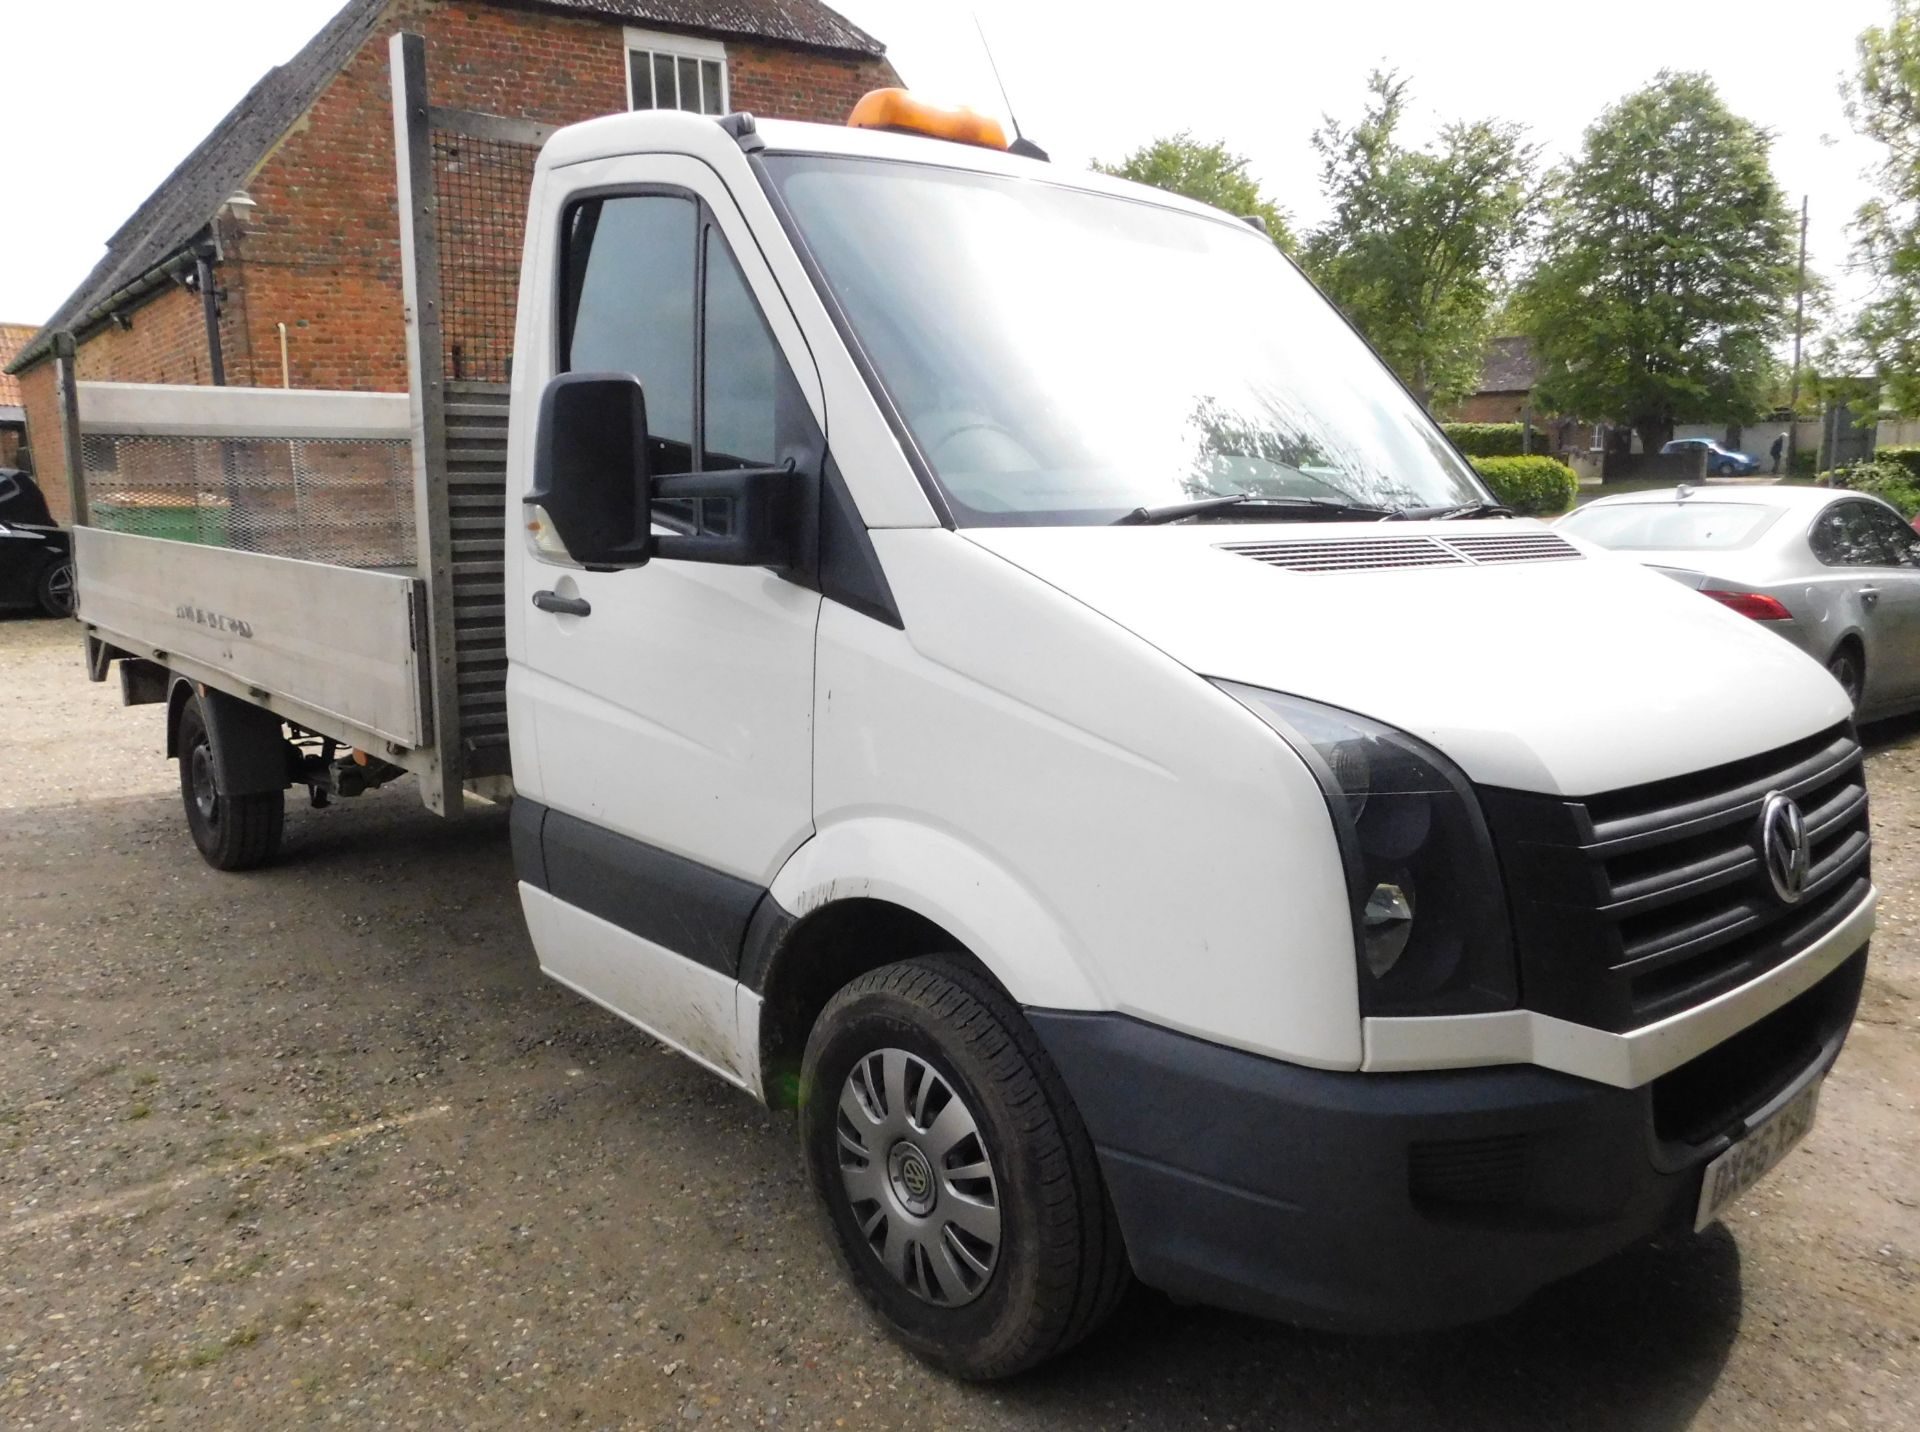 Volkswagen Crafter CR35 LWB, 2.0 TDI 136PS Chassis Cab, Registration DX66 XSD, First Registered 29th